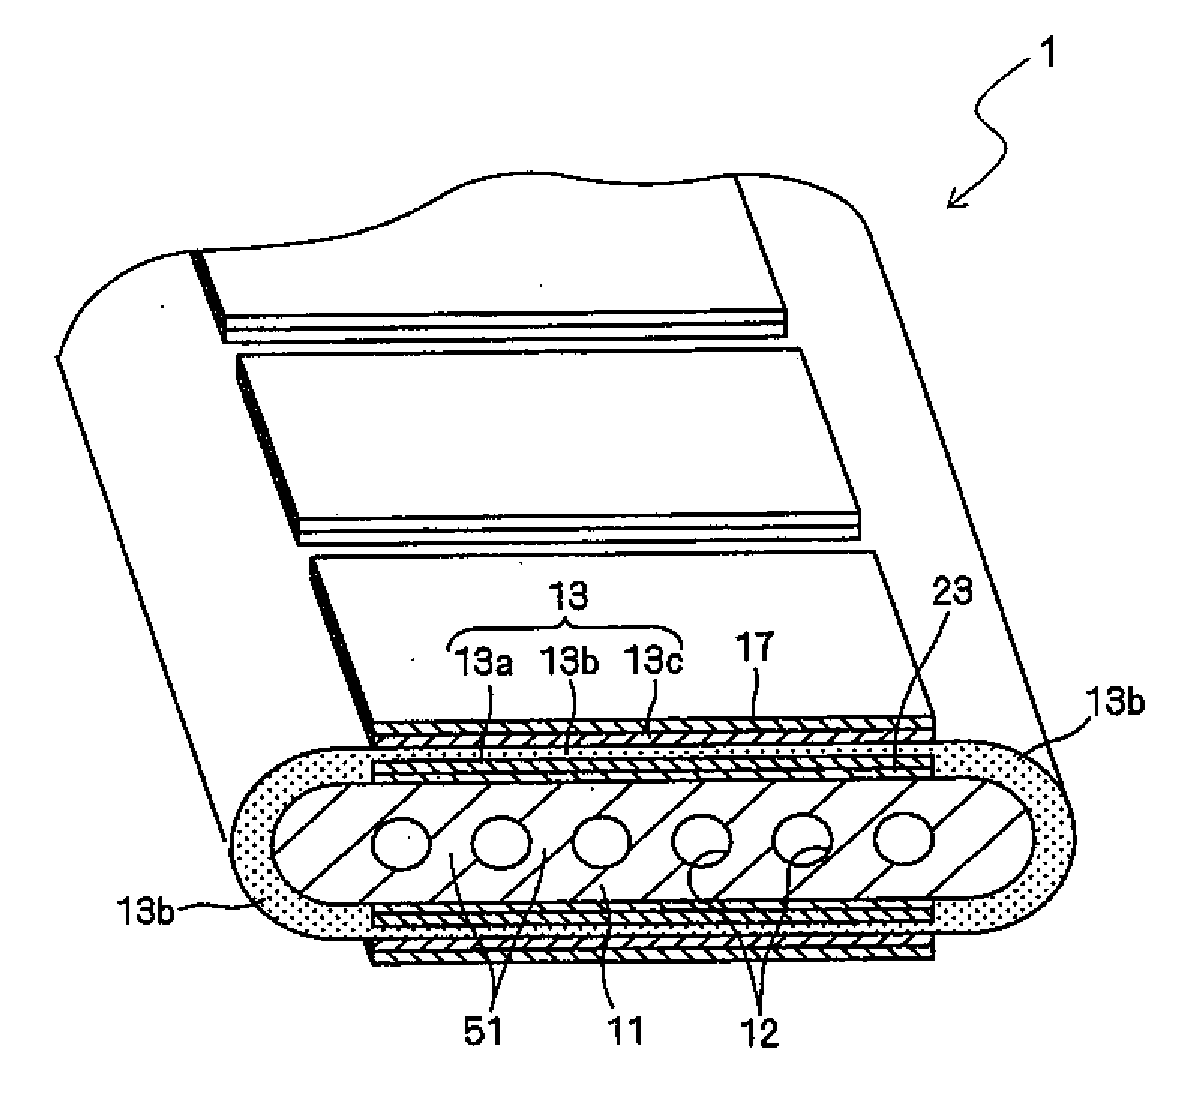 Segmented-In-Series Solid Oxide Fuel Cell Stack and Fuel Cell